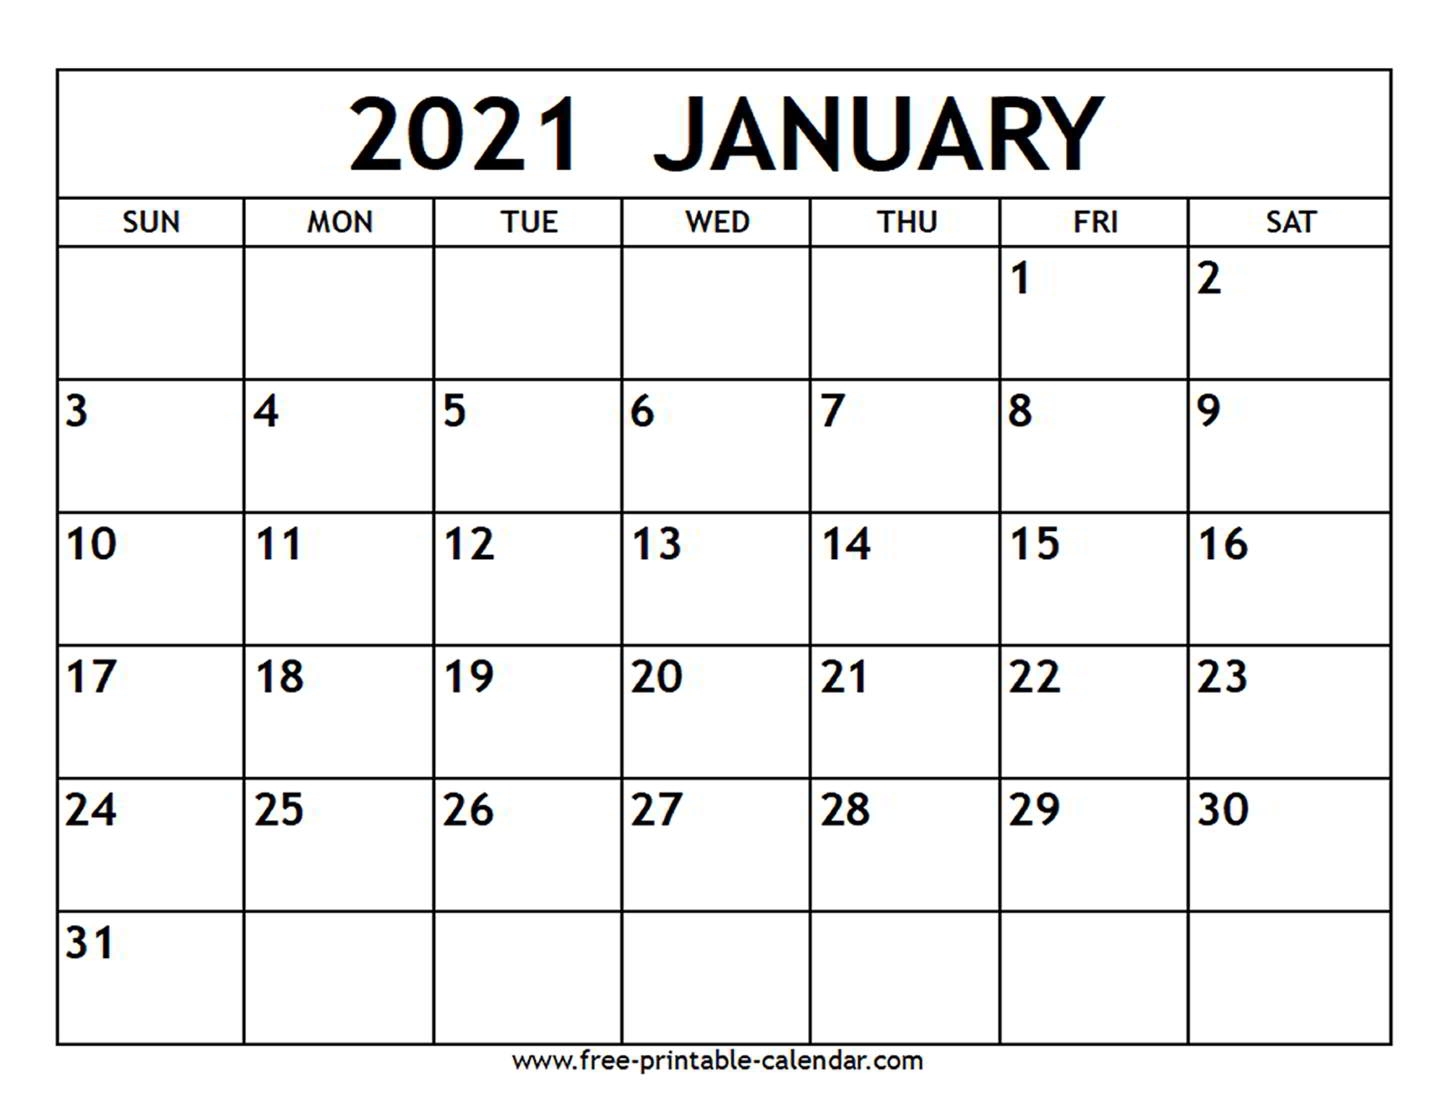 Get Free Print 2021 Calendars Without Downloading